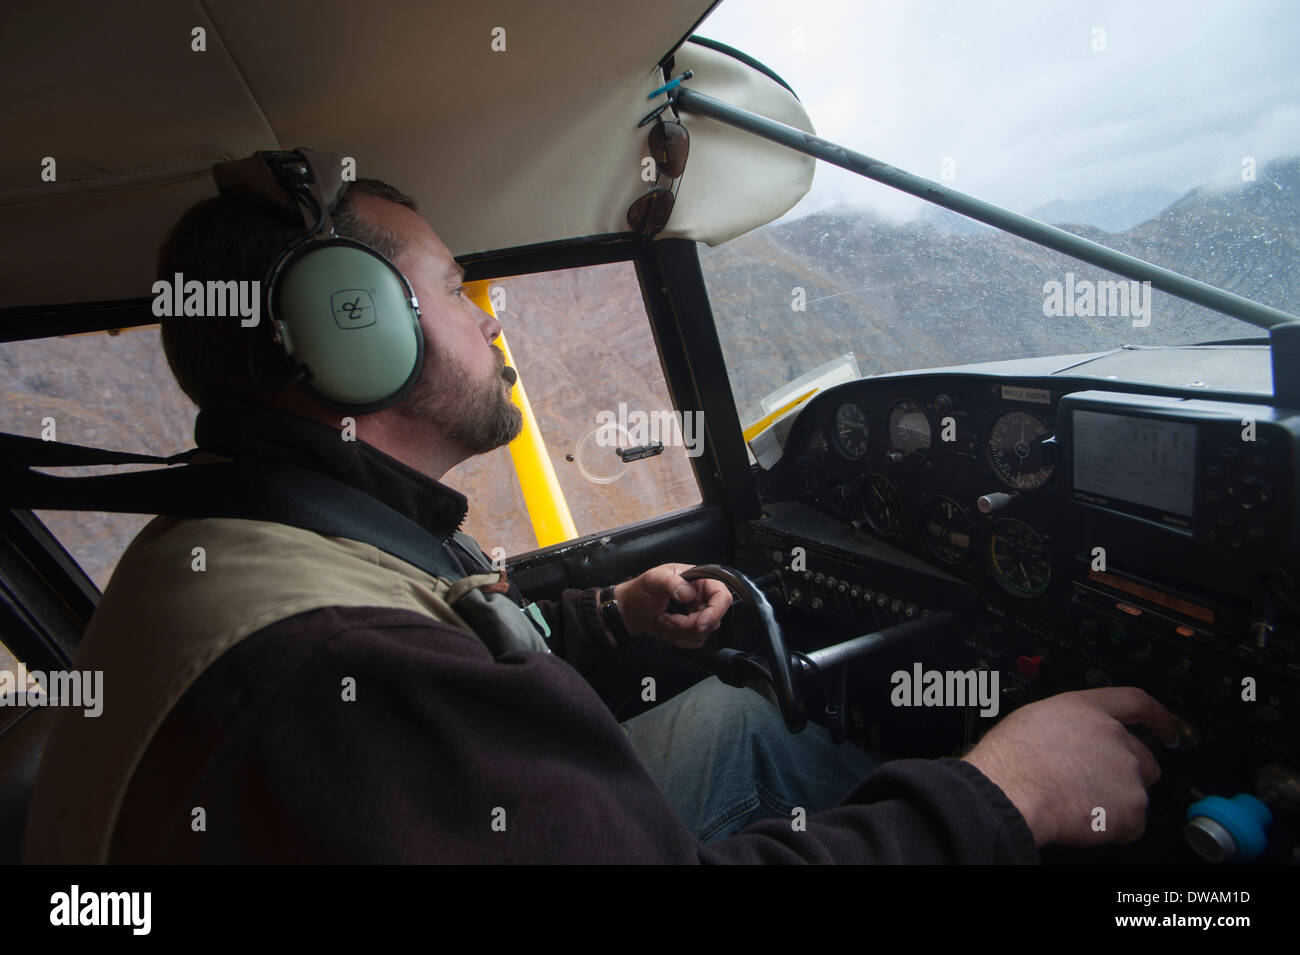 Single engine airplane pilot flying in bad weather Stock Photo